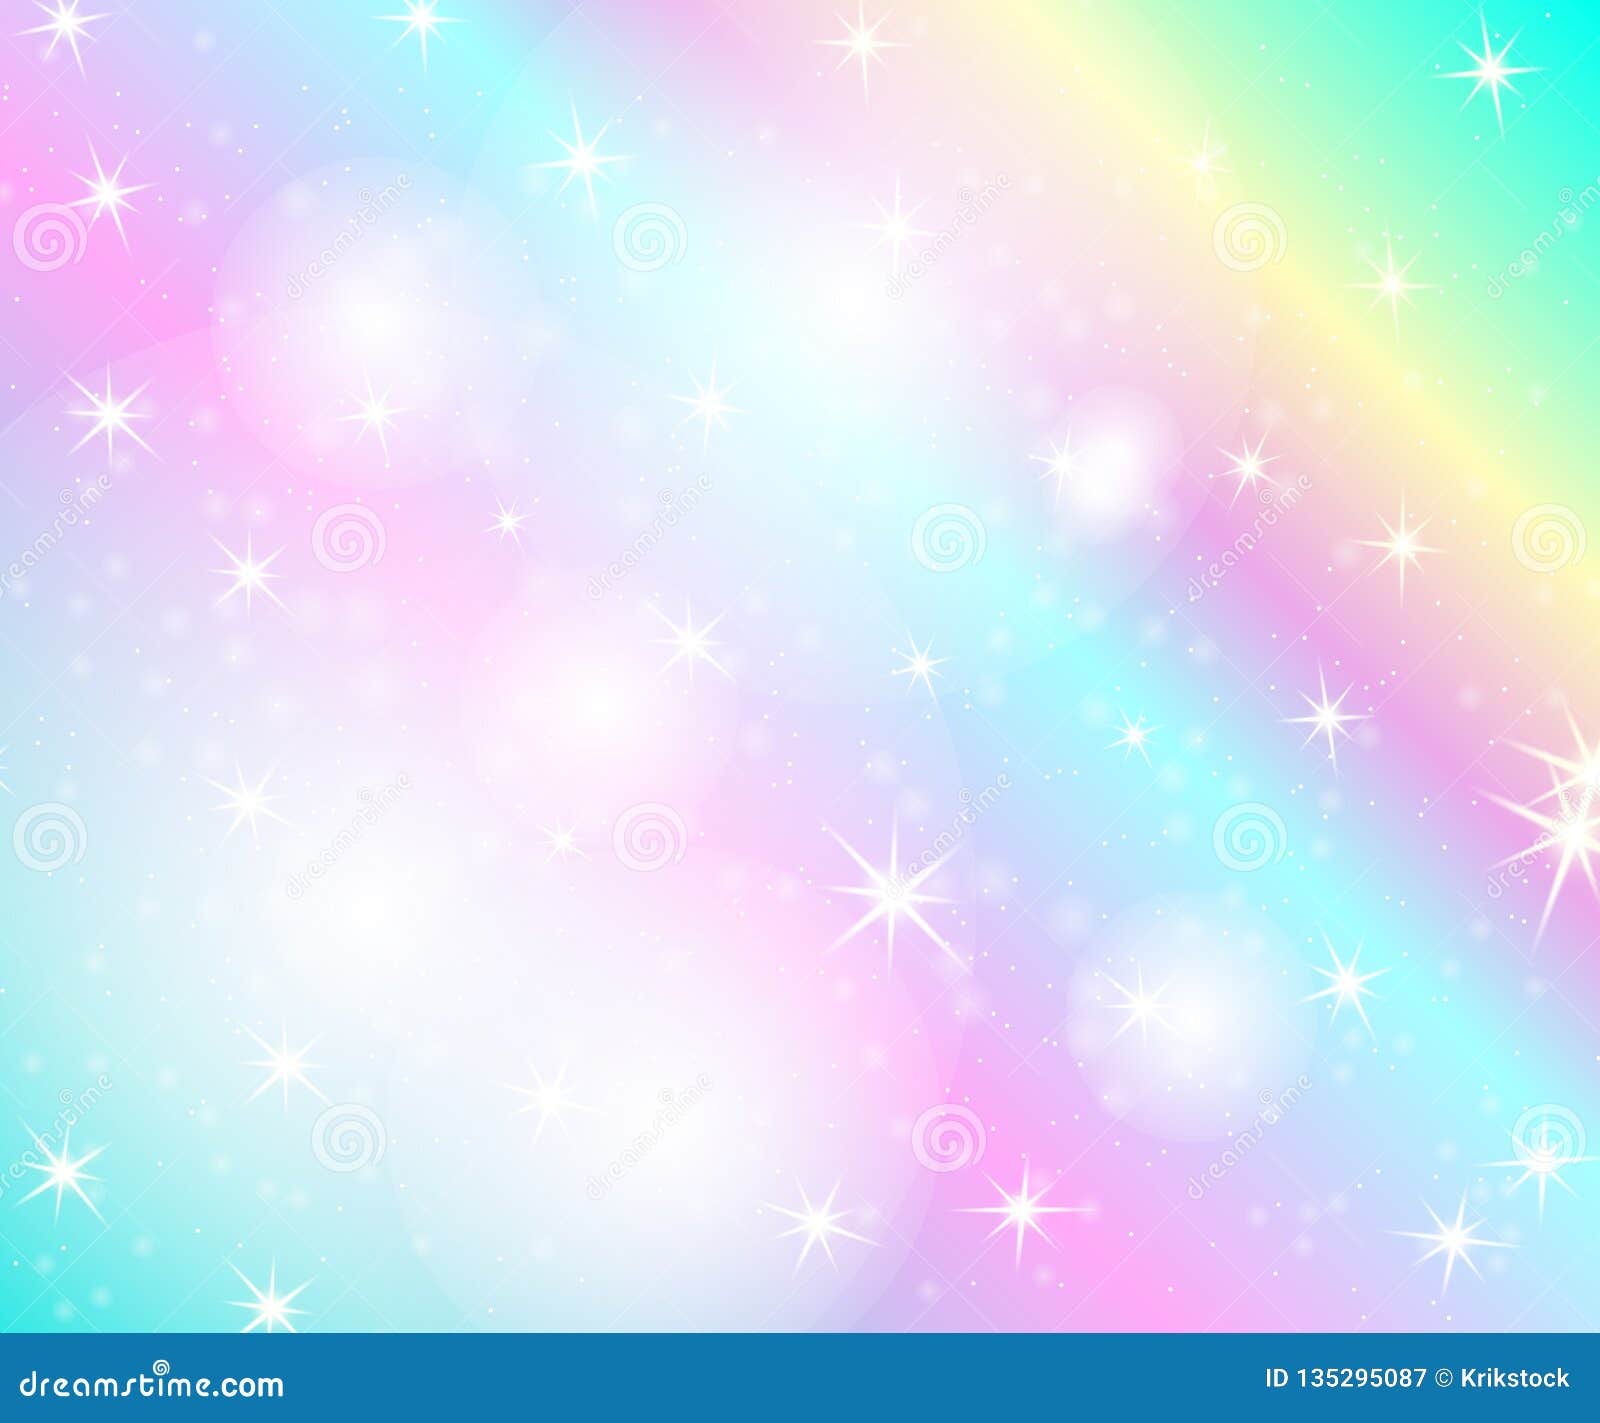 Unicorn Rainbow Background. Holographic Sky In Pastel Color. Bright Mermaid Pattern In Princess ...